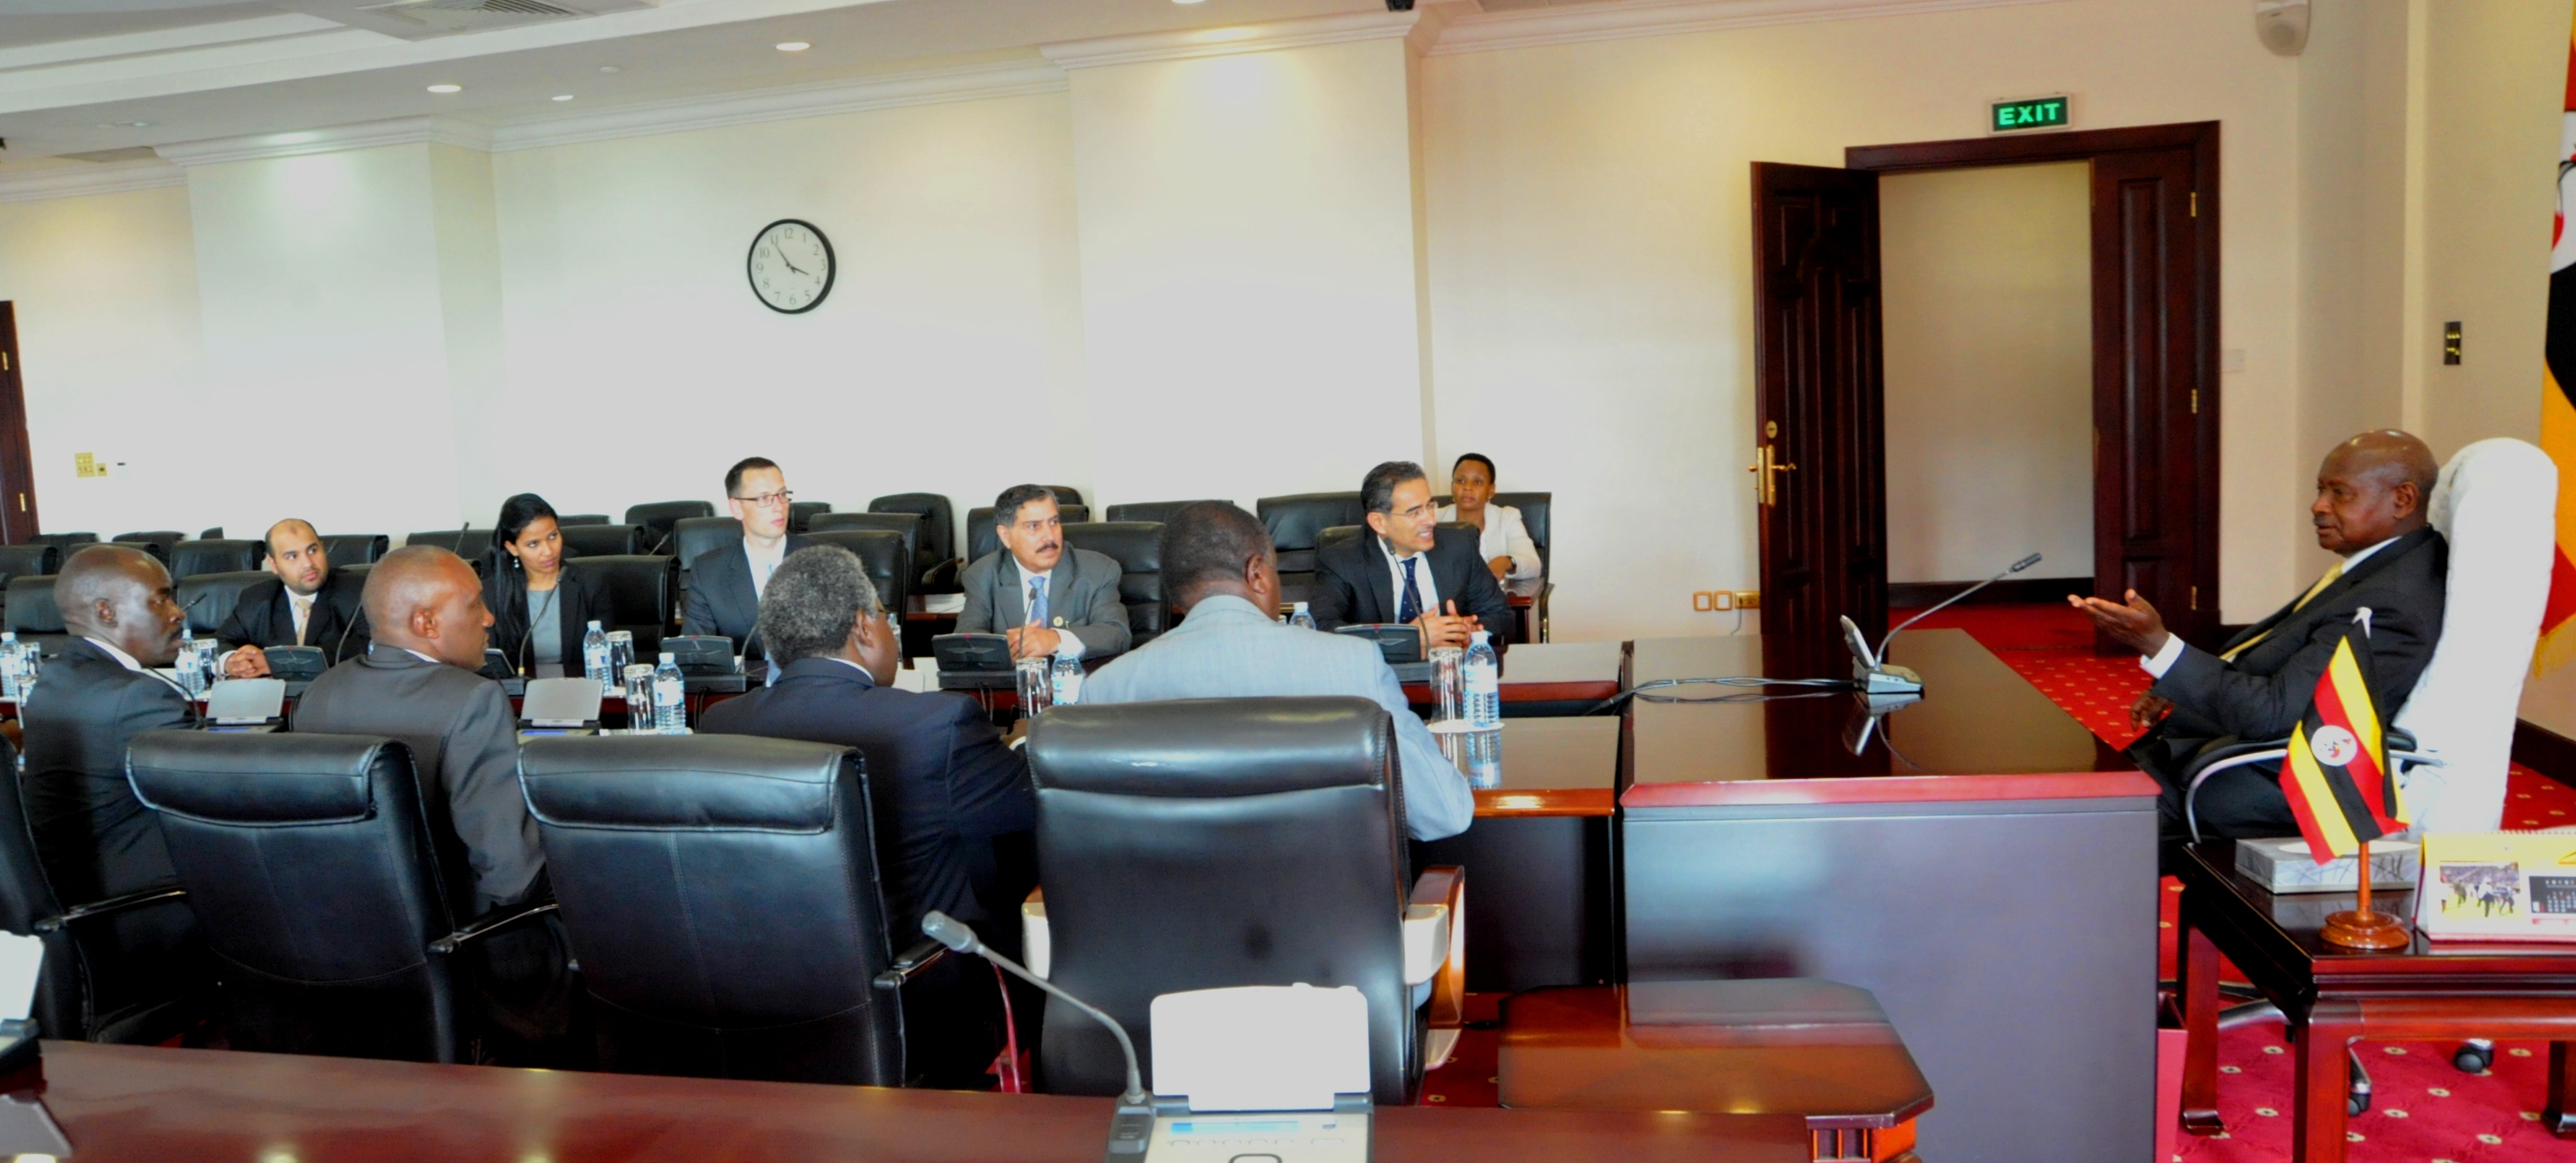 PRESIDWENT M7 MEETING A DELIGATION FROM ALEMAAR  INVESTMENT AT ENTEBBE STATE HOUSE 28.7.2015